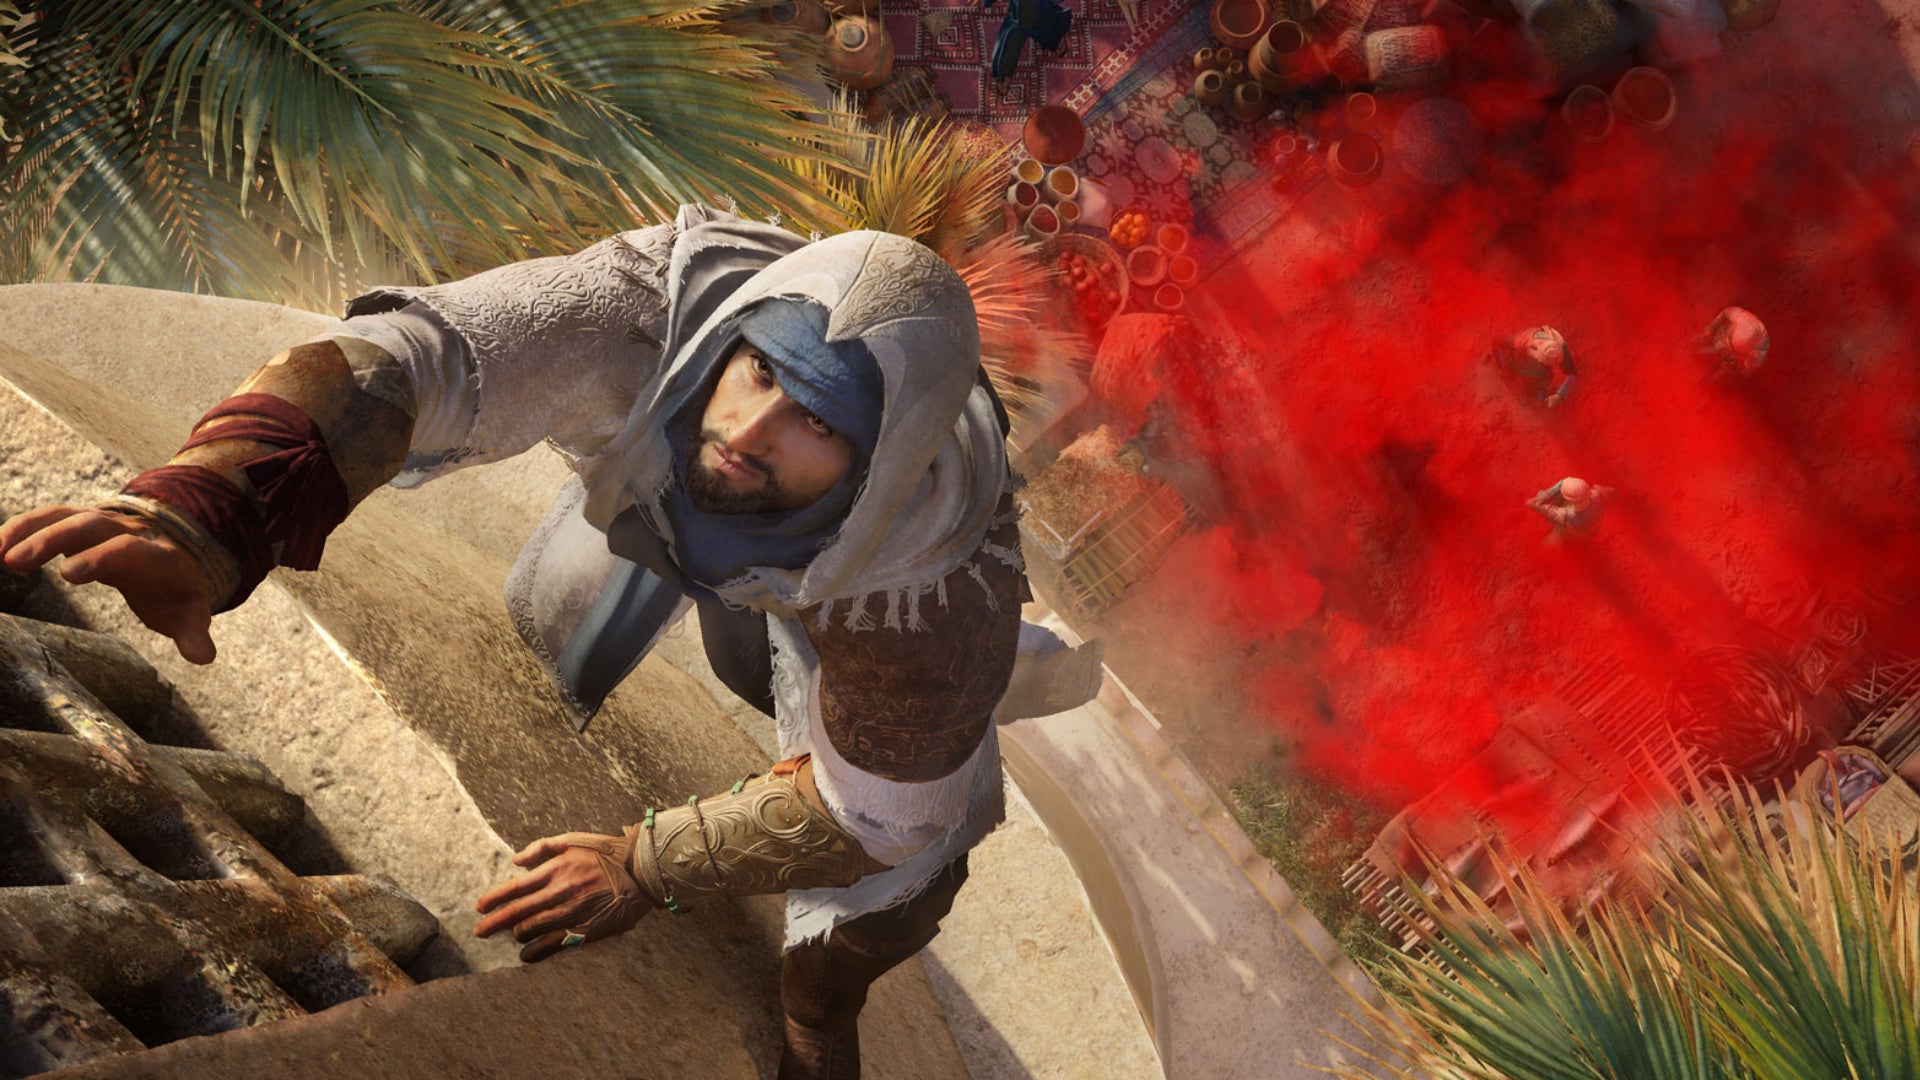 The main character of Assassin's Creed Mirage, Basim, climbs the side of a building after dropping a red smoke bomb onto the people below.